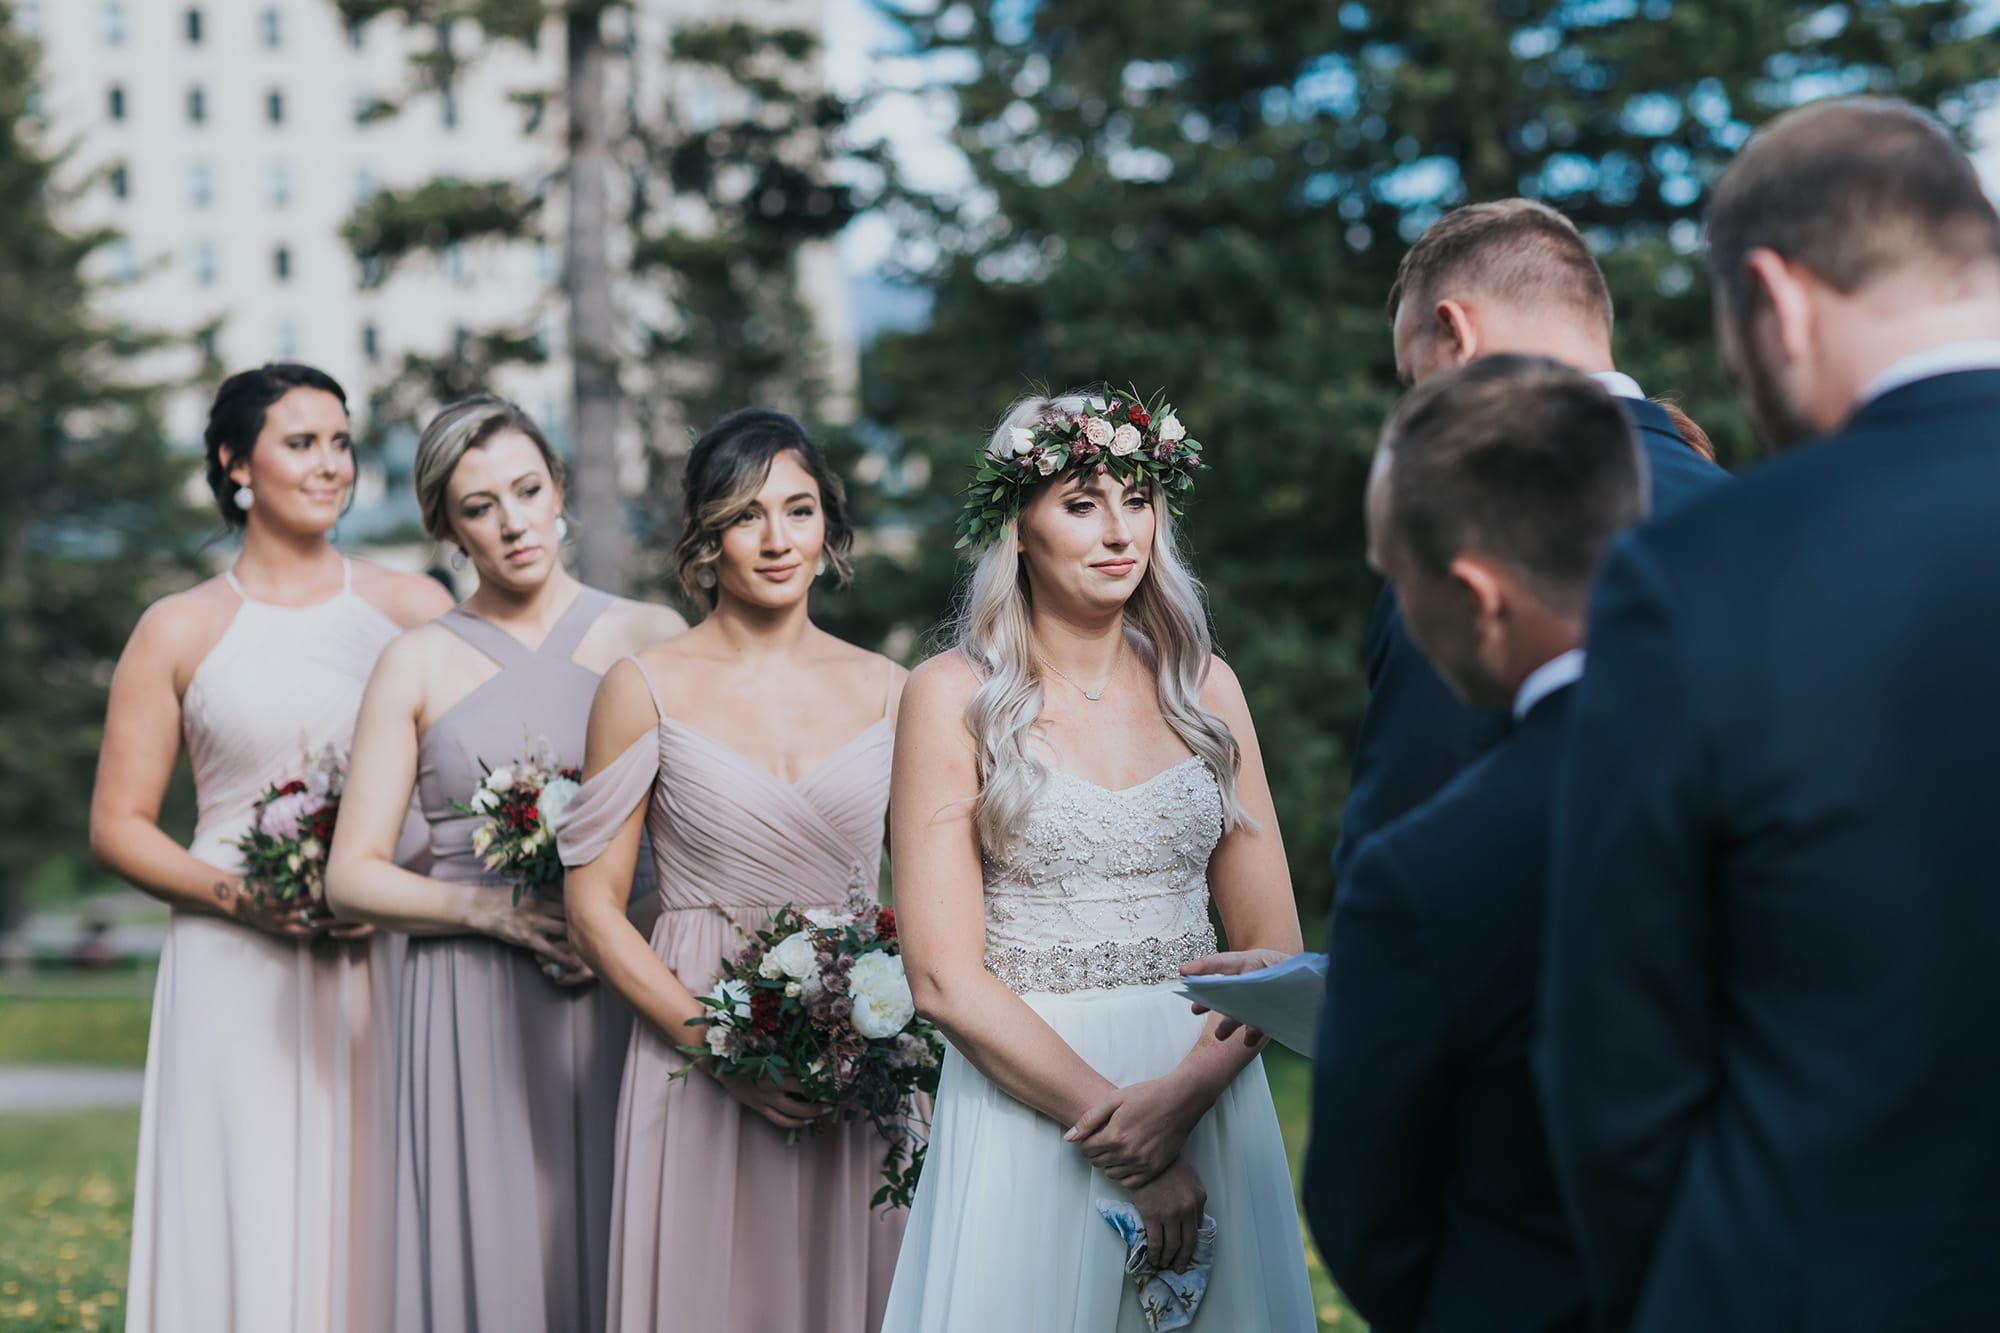 get married in lake louise wedding photographers